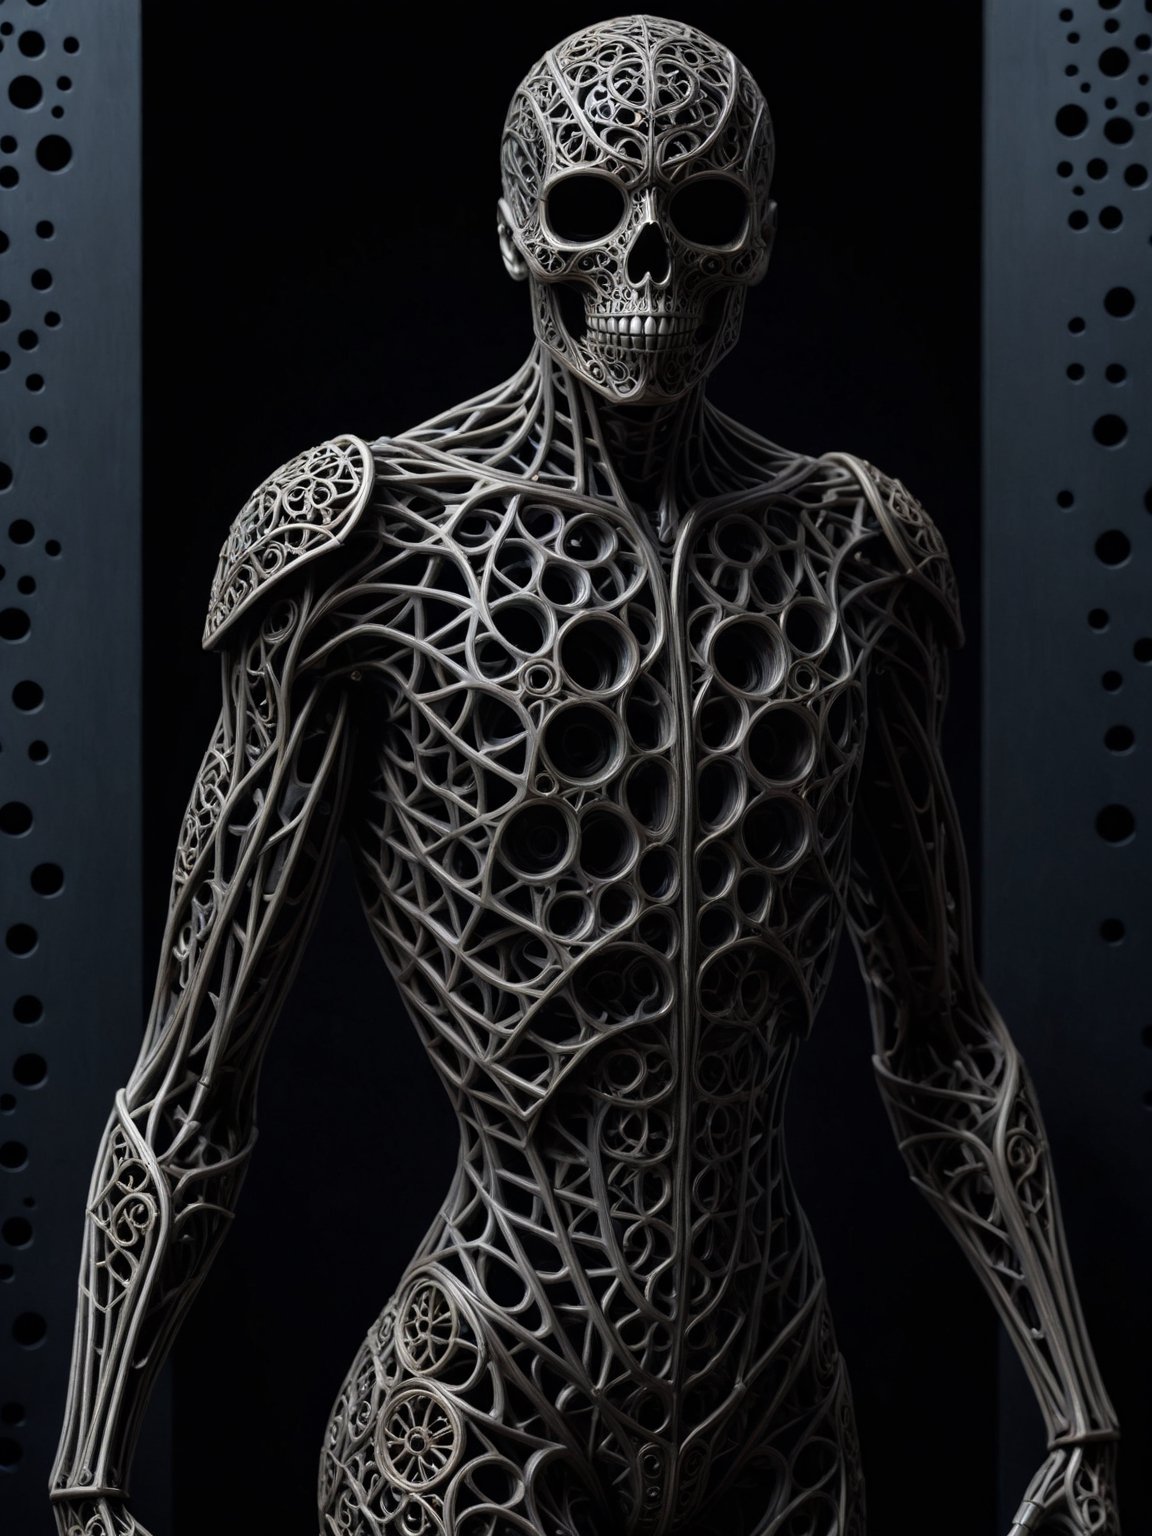 masterpiece, intricate details, dark metal black skeleton cyborg, exquisite геометрическая metal body structure, intricate detailed filigree delicate inner structure, (voids in body:1.3), (voids in body:1.3), (gaps in body:1.5), (holes in body:1.5), (hollows in body:1.5), close-up shot of torso, see through body, orange background,ral-pnrse